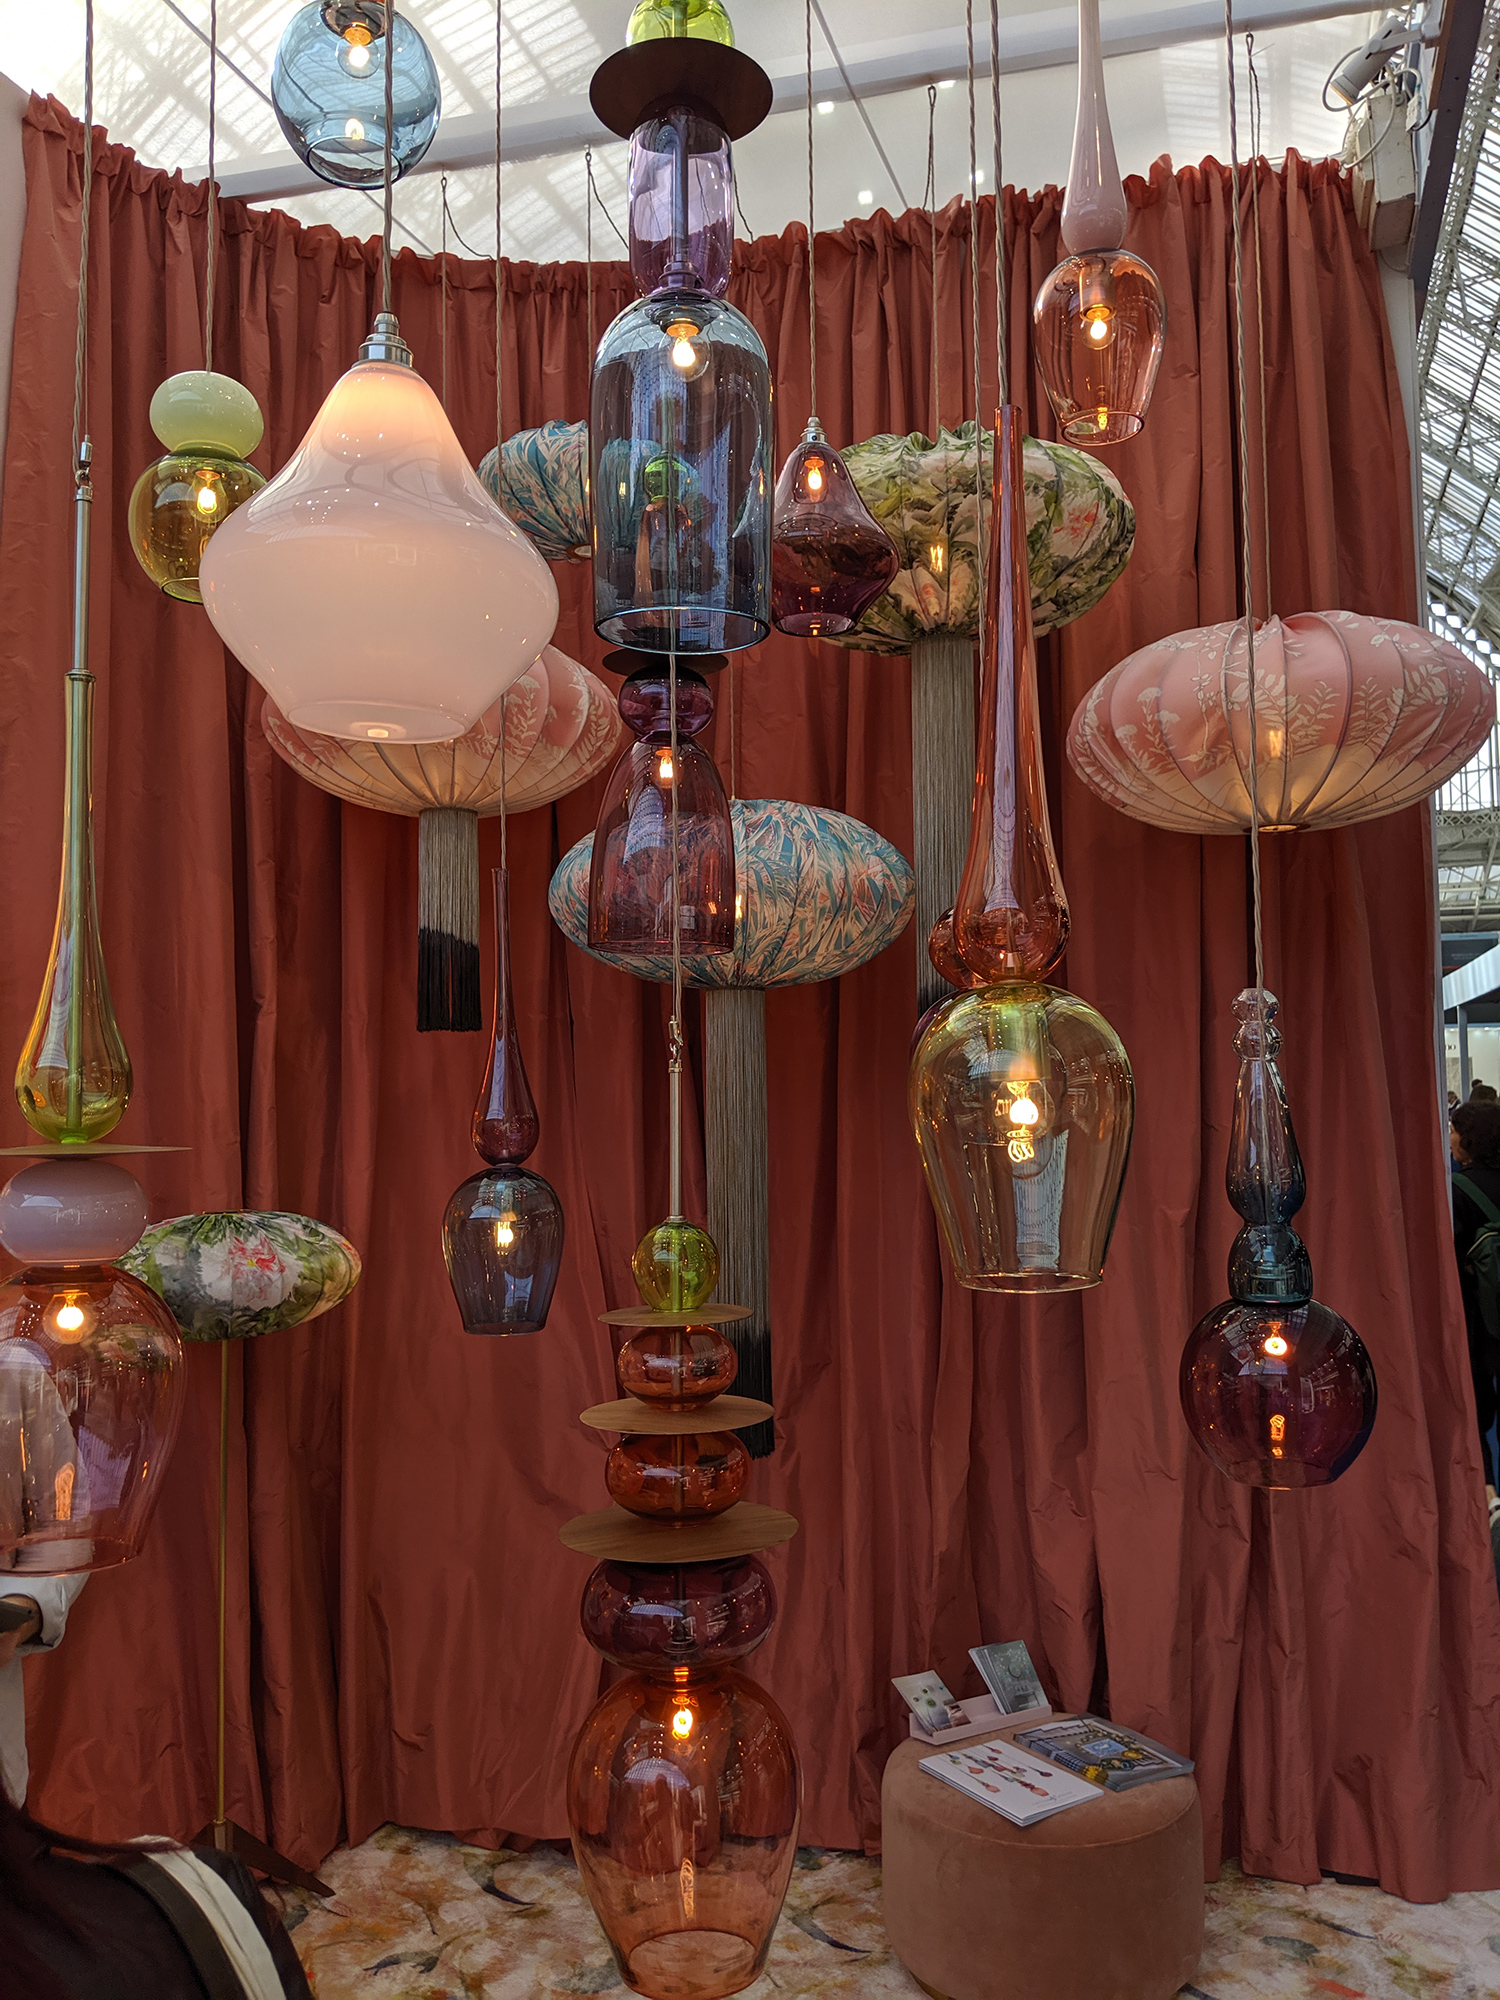 Lighting based on curves and organic shapes at the Curiousa & Curiousa stand.